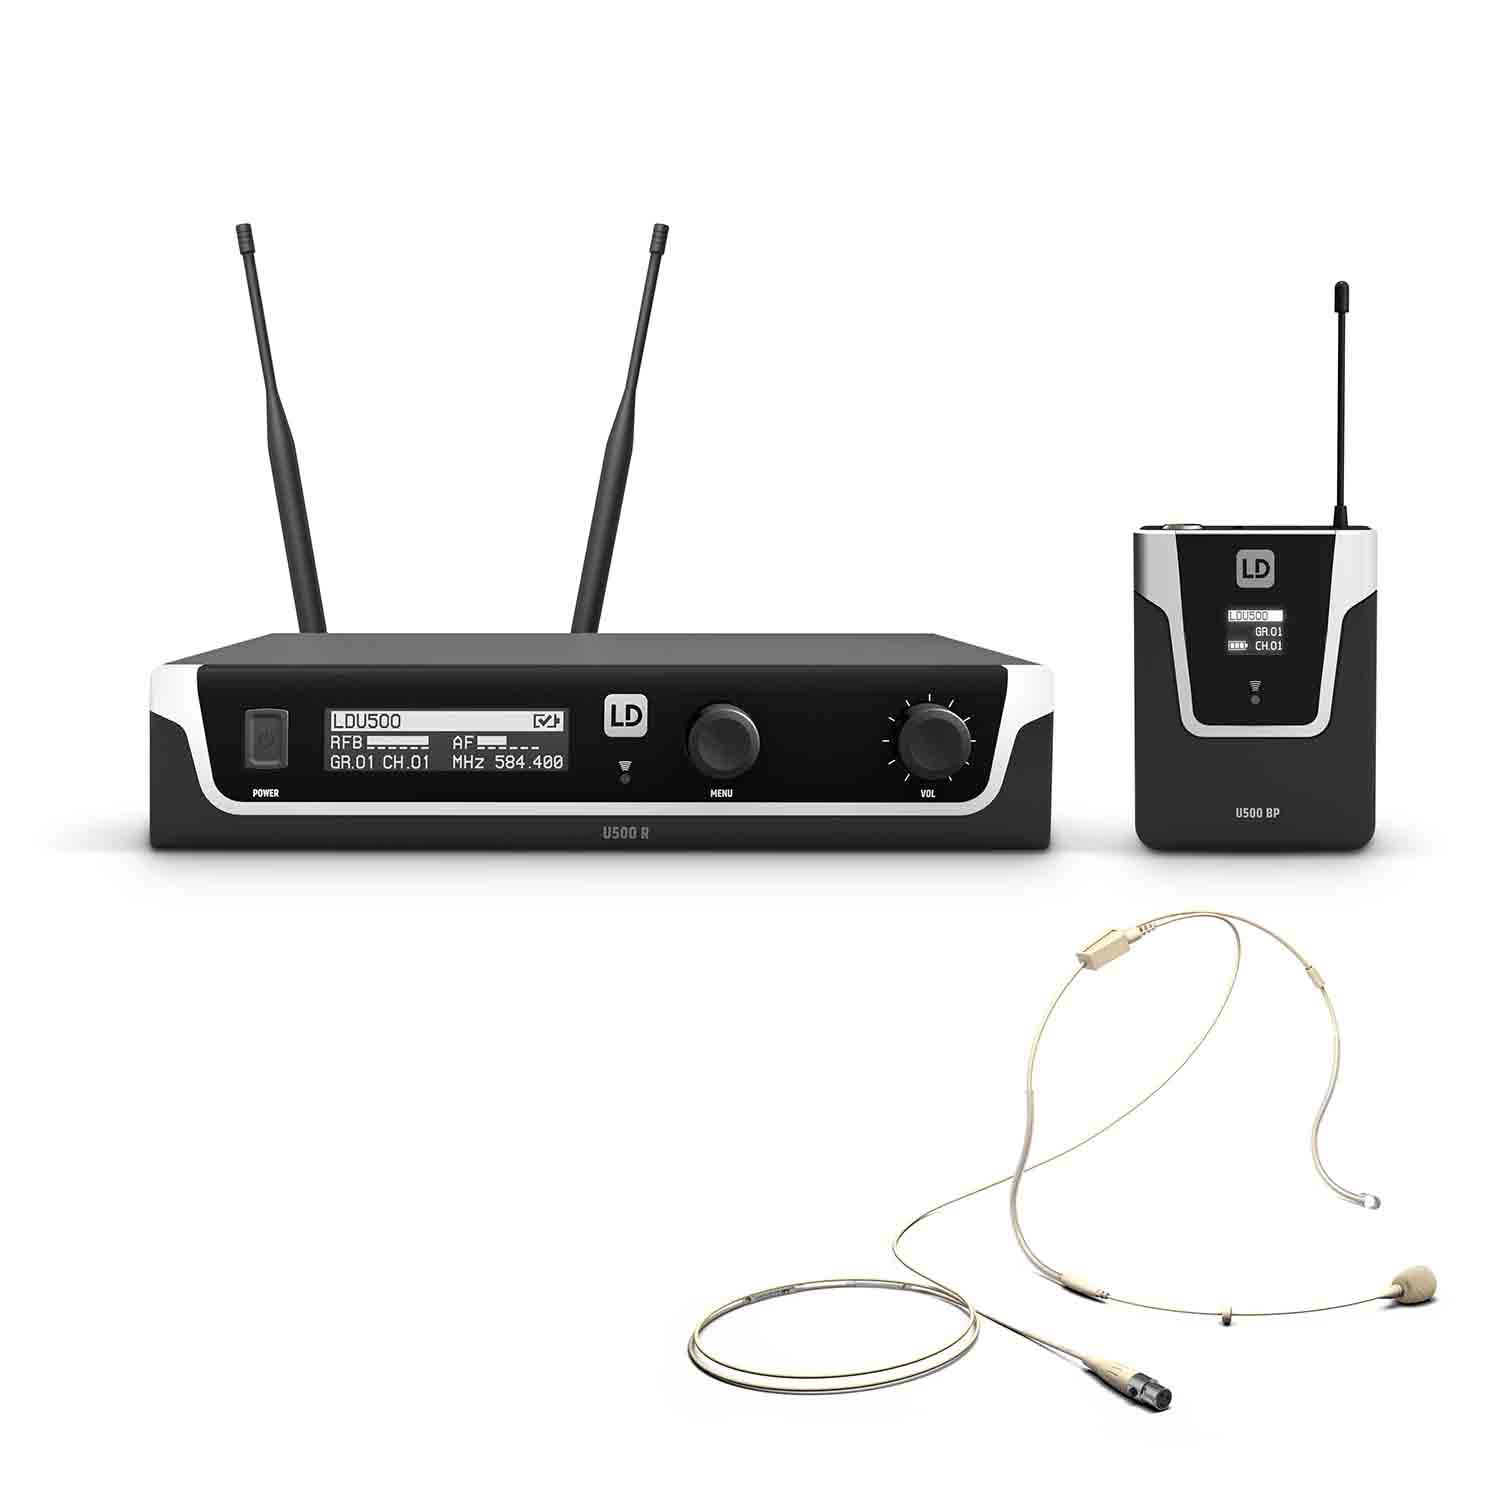 LD Systems U505 BPHH Wireless Microphone System with Bodypack and Headset Beige (584 - 608 MHz) - Hollywood DJ